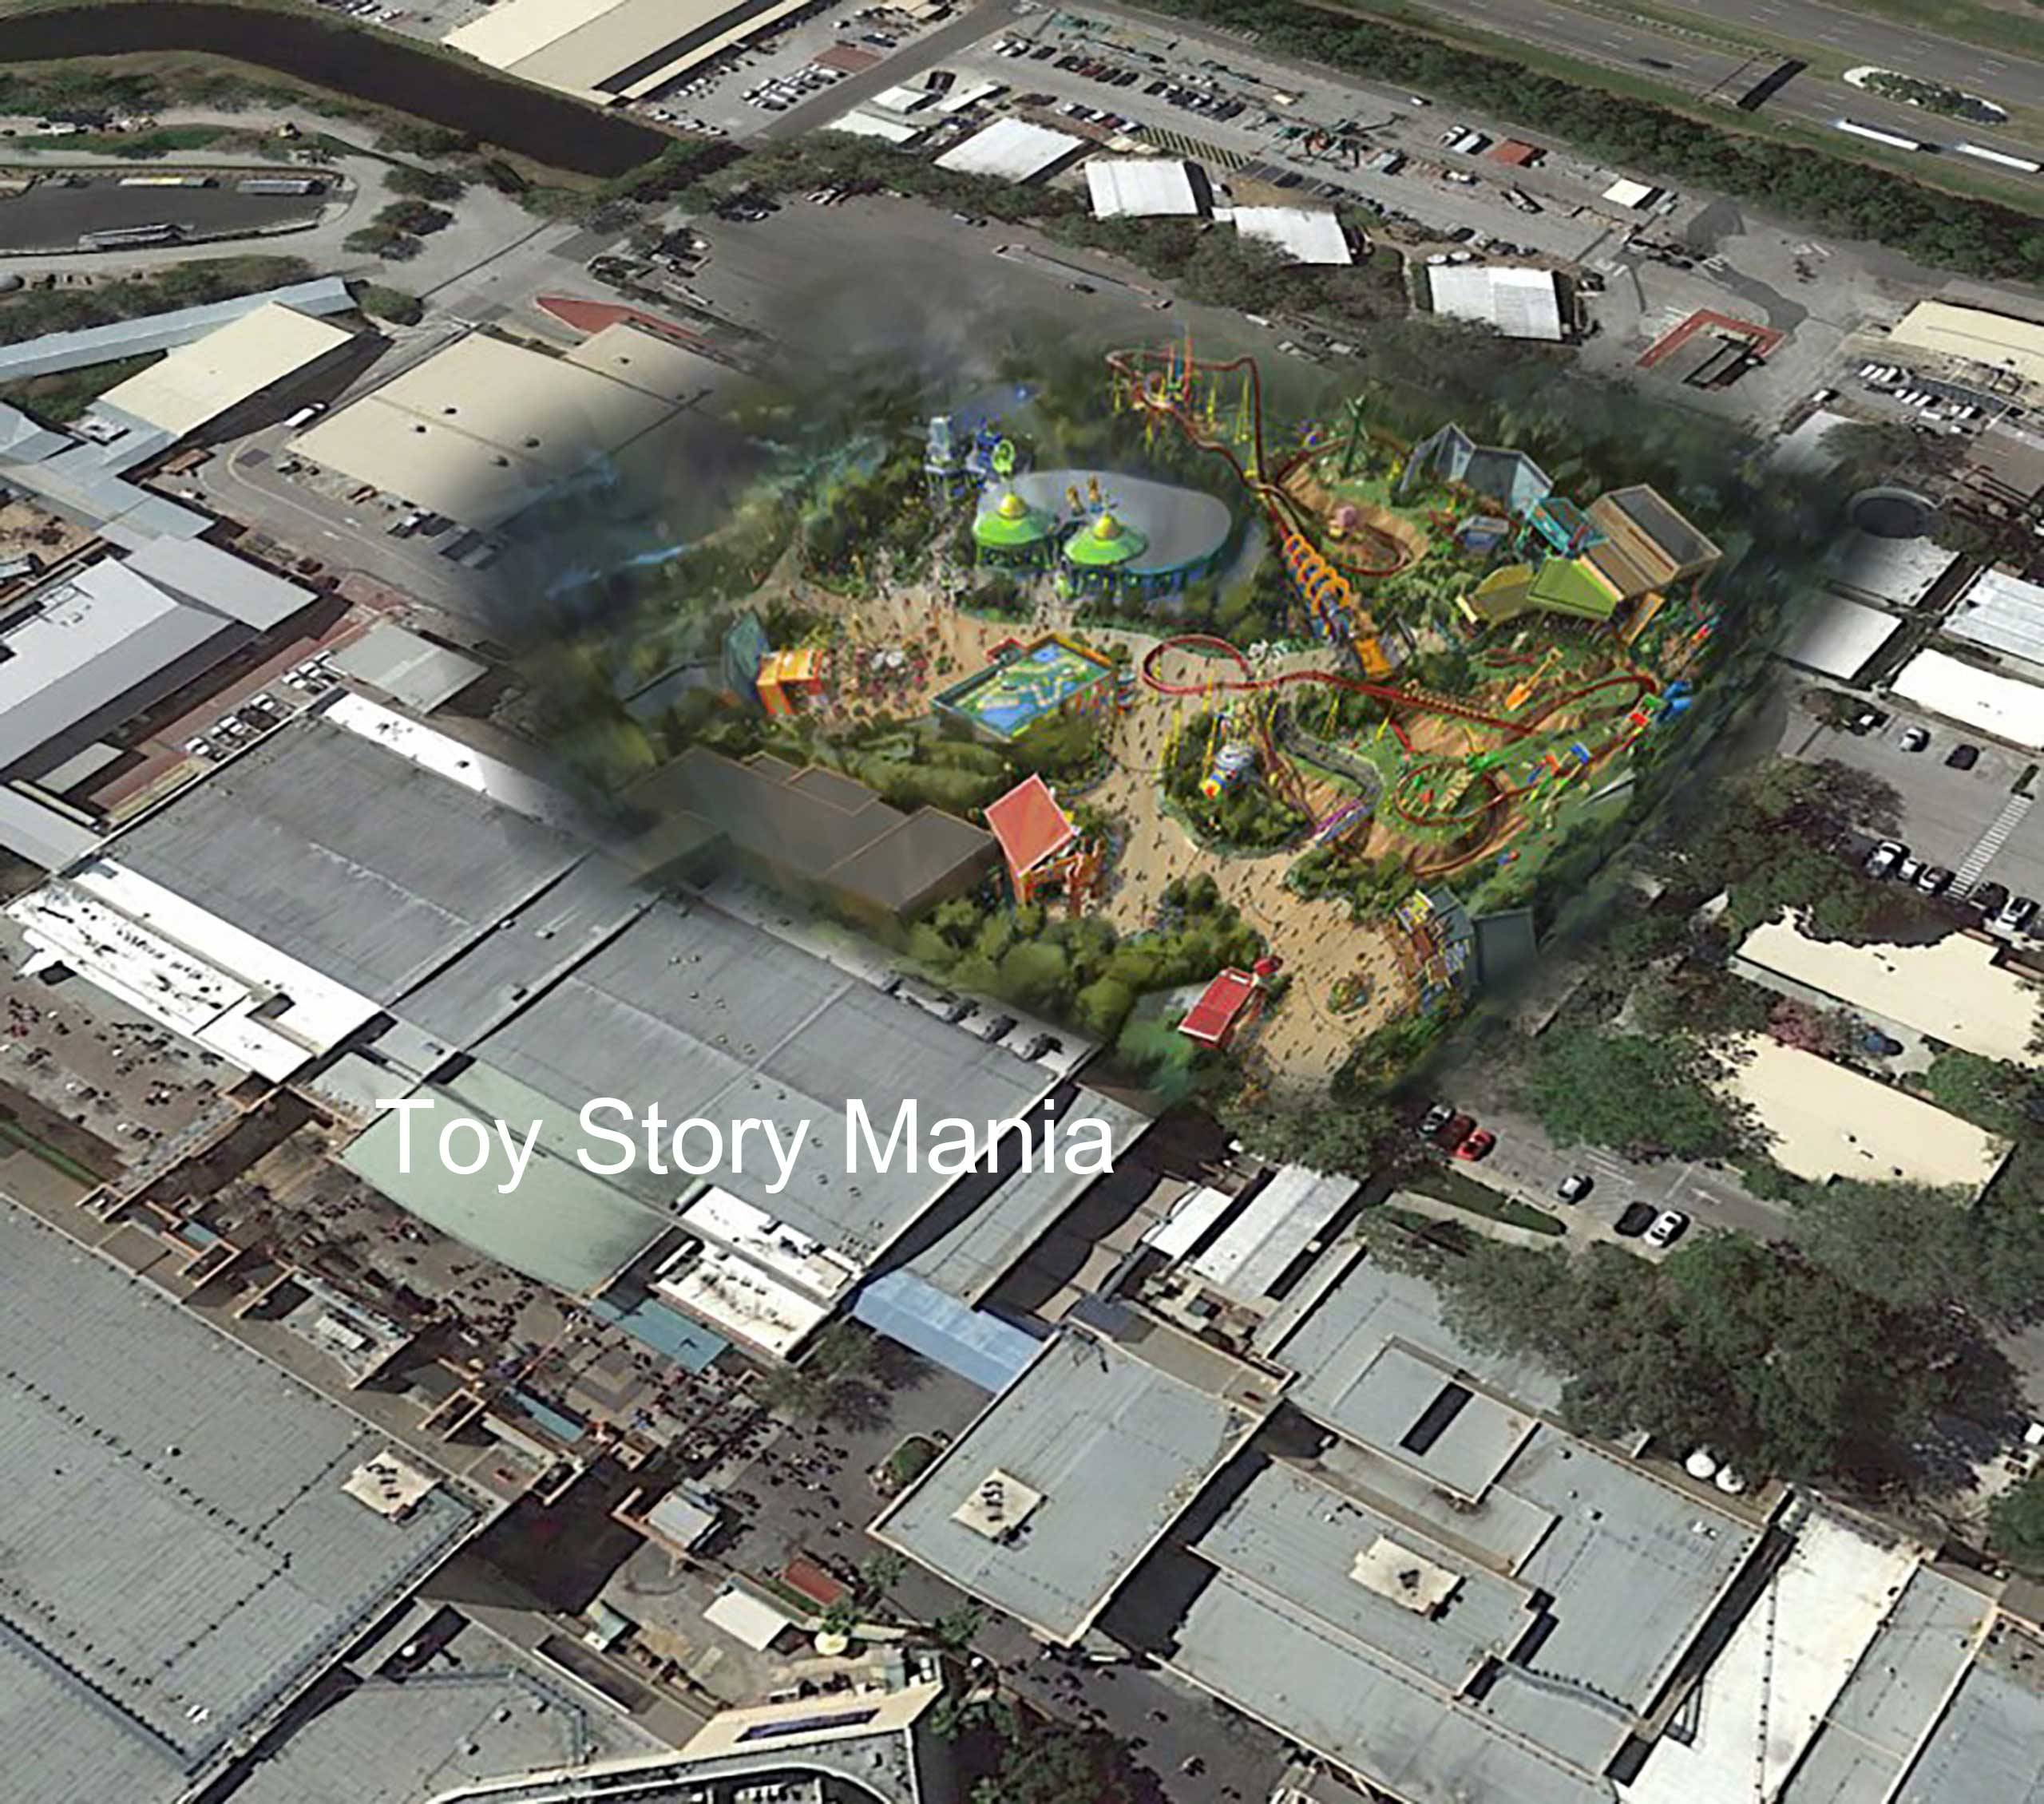 How Star Wars Land and Toy Story Land may fit within Disney's Hollywood Studios